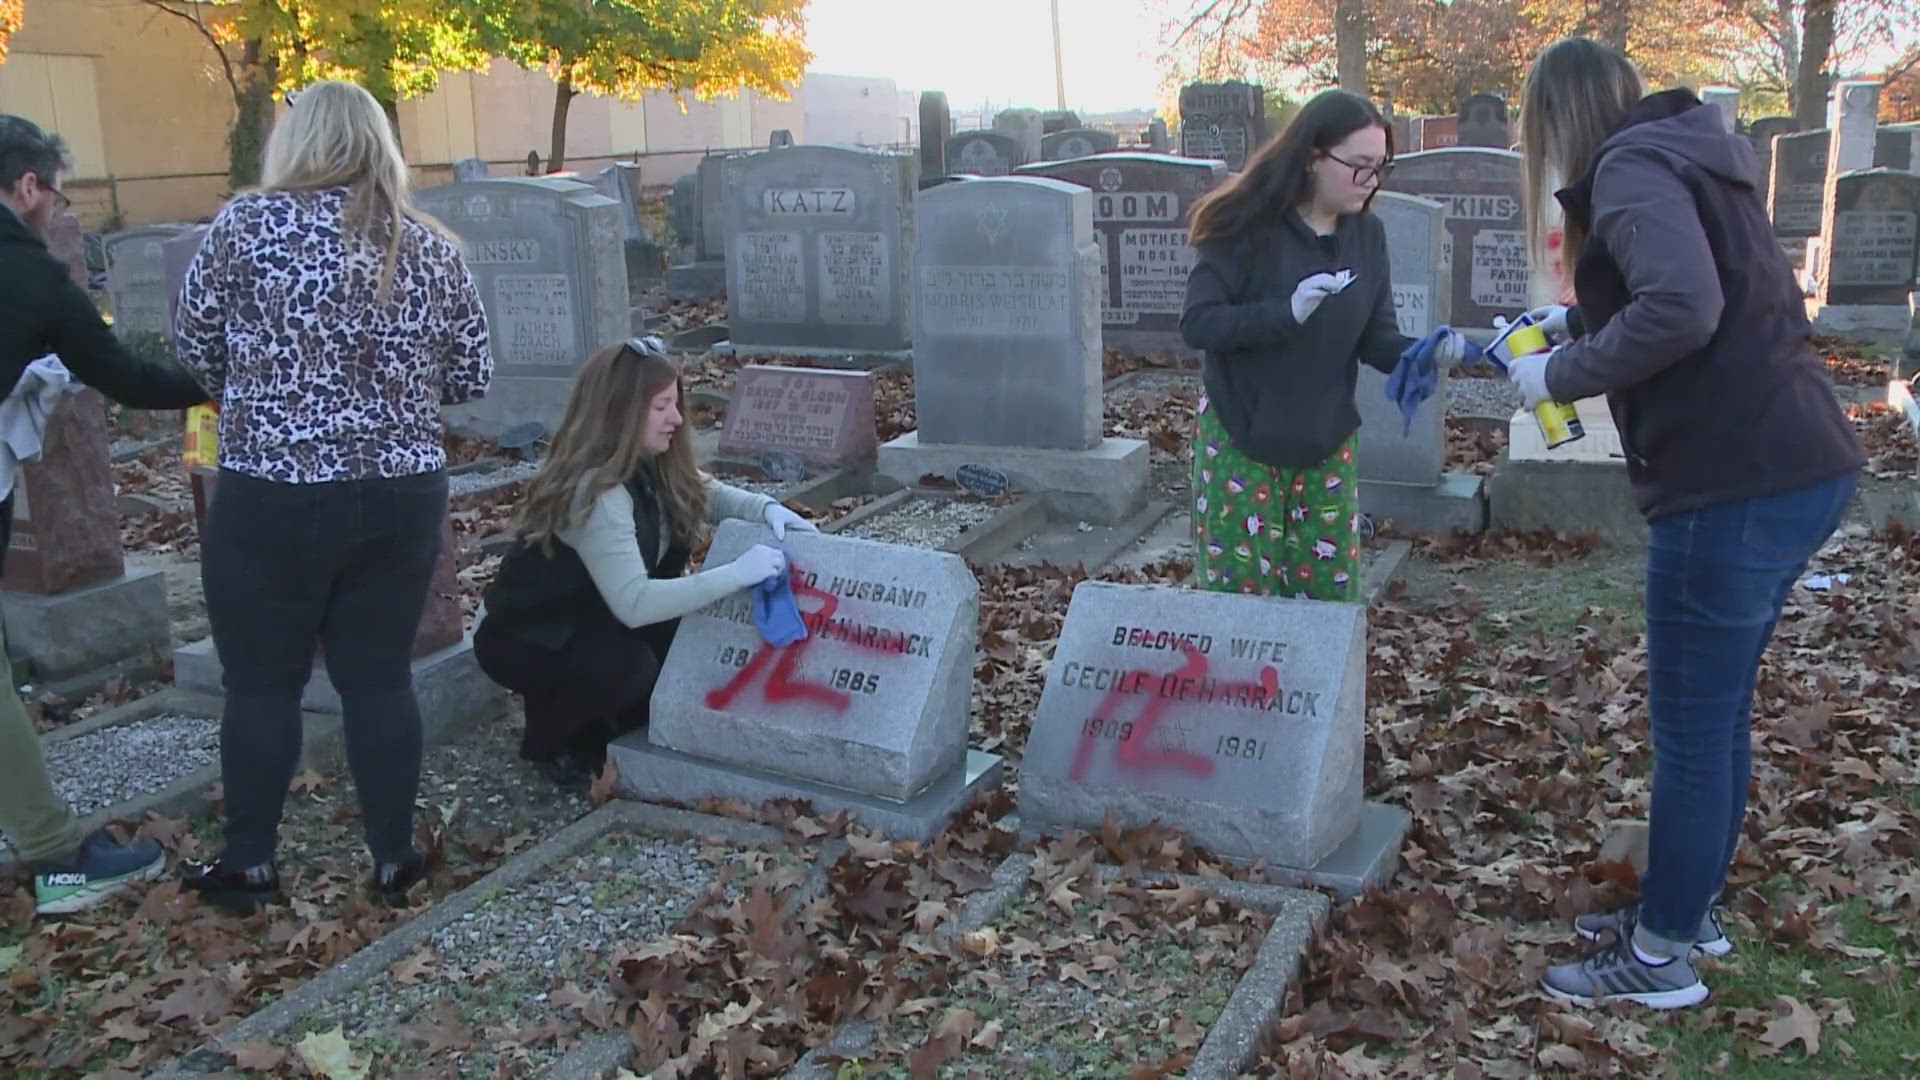 23 headstones at Chesed Shel Emeth Cemetery were spray-painted with red swastikas over the weekend. This comes amid a rise in antisemitic incidents across America.